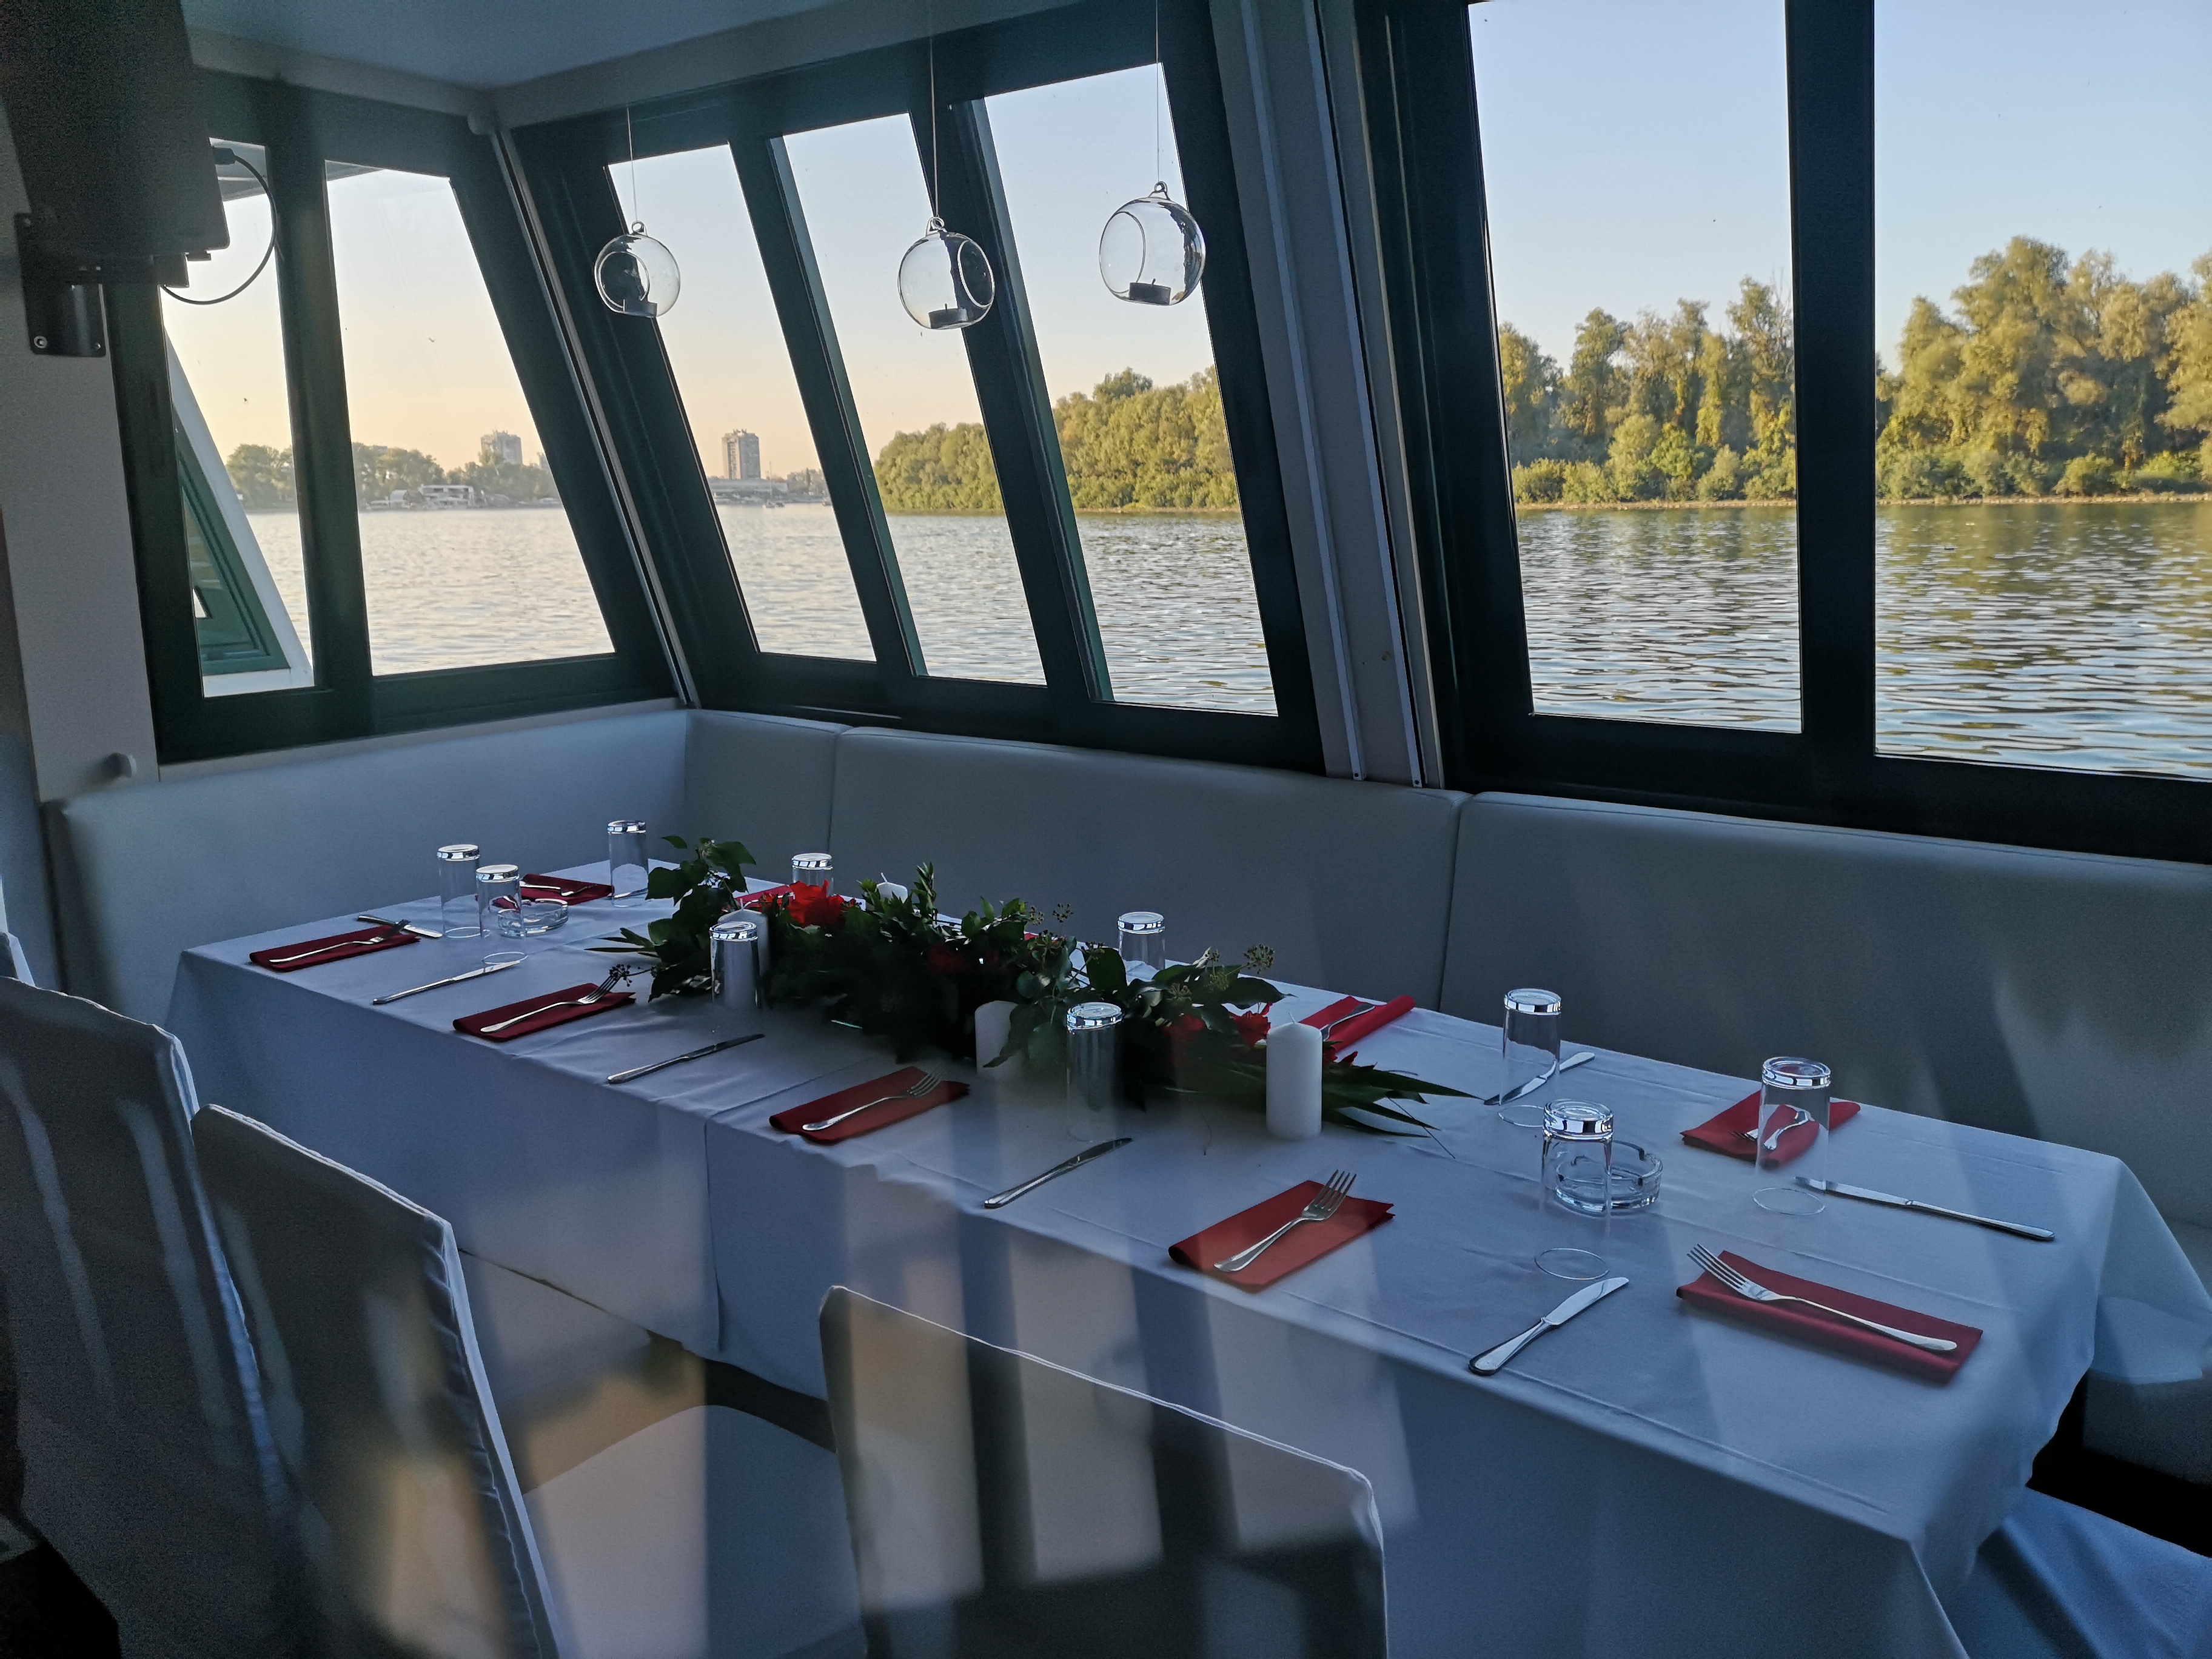 2021/12/images/tour_505/new-years-eve-cruise-2022-on-danube-and-sava-rivers.jpg